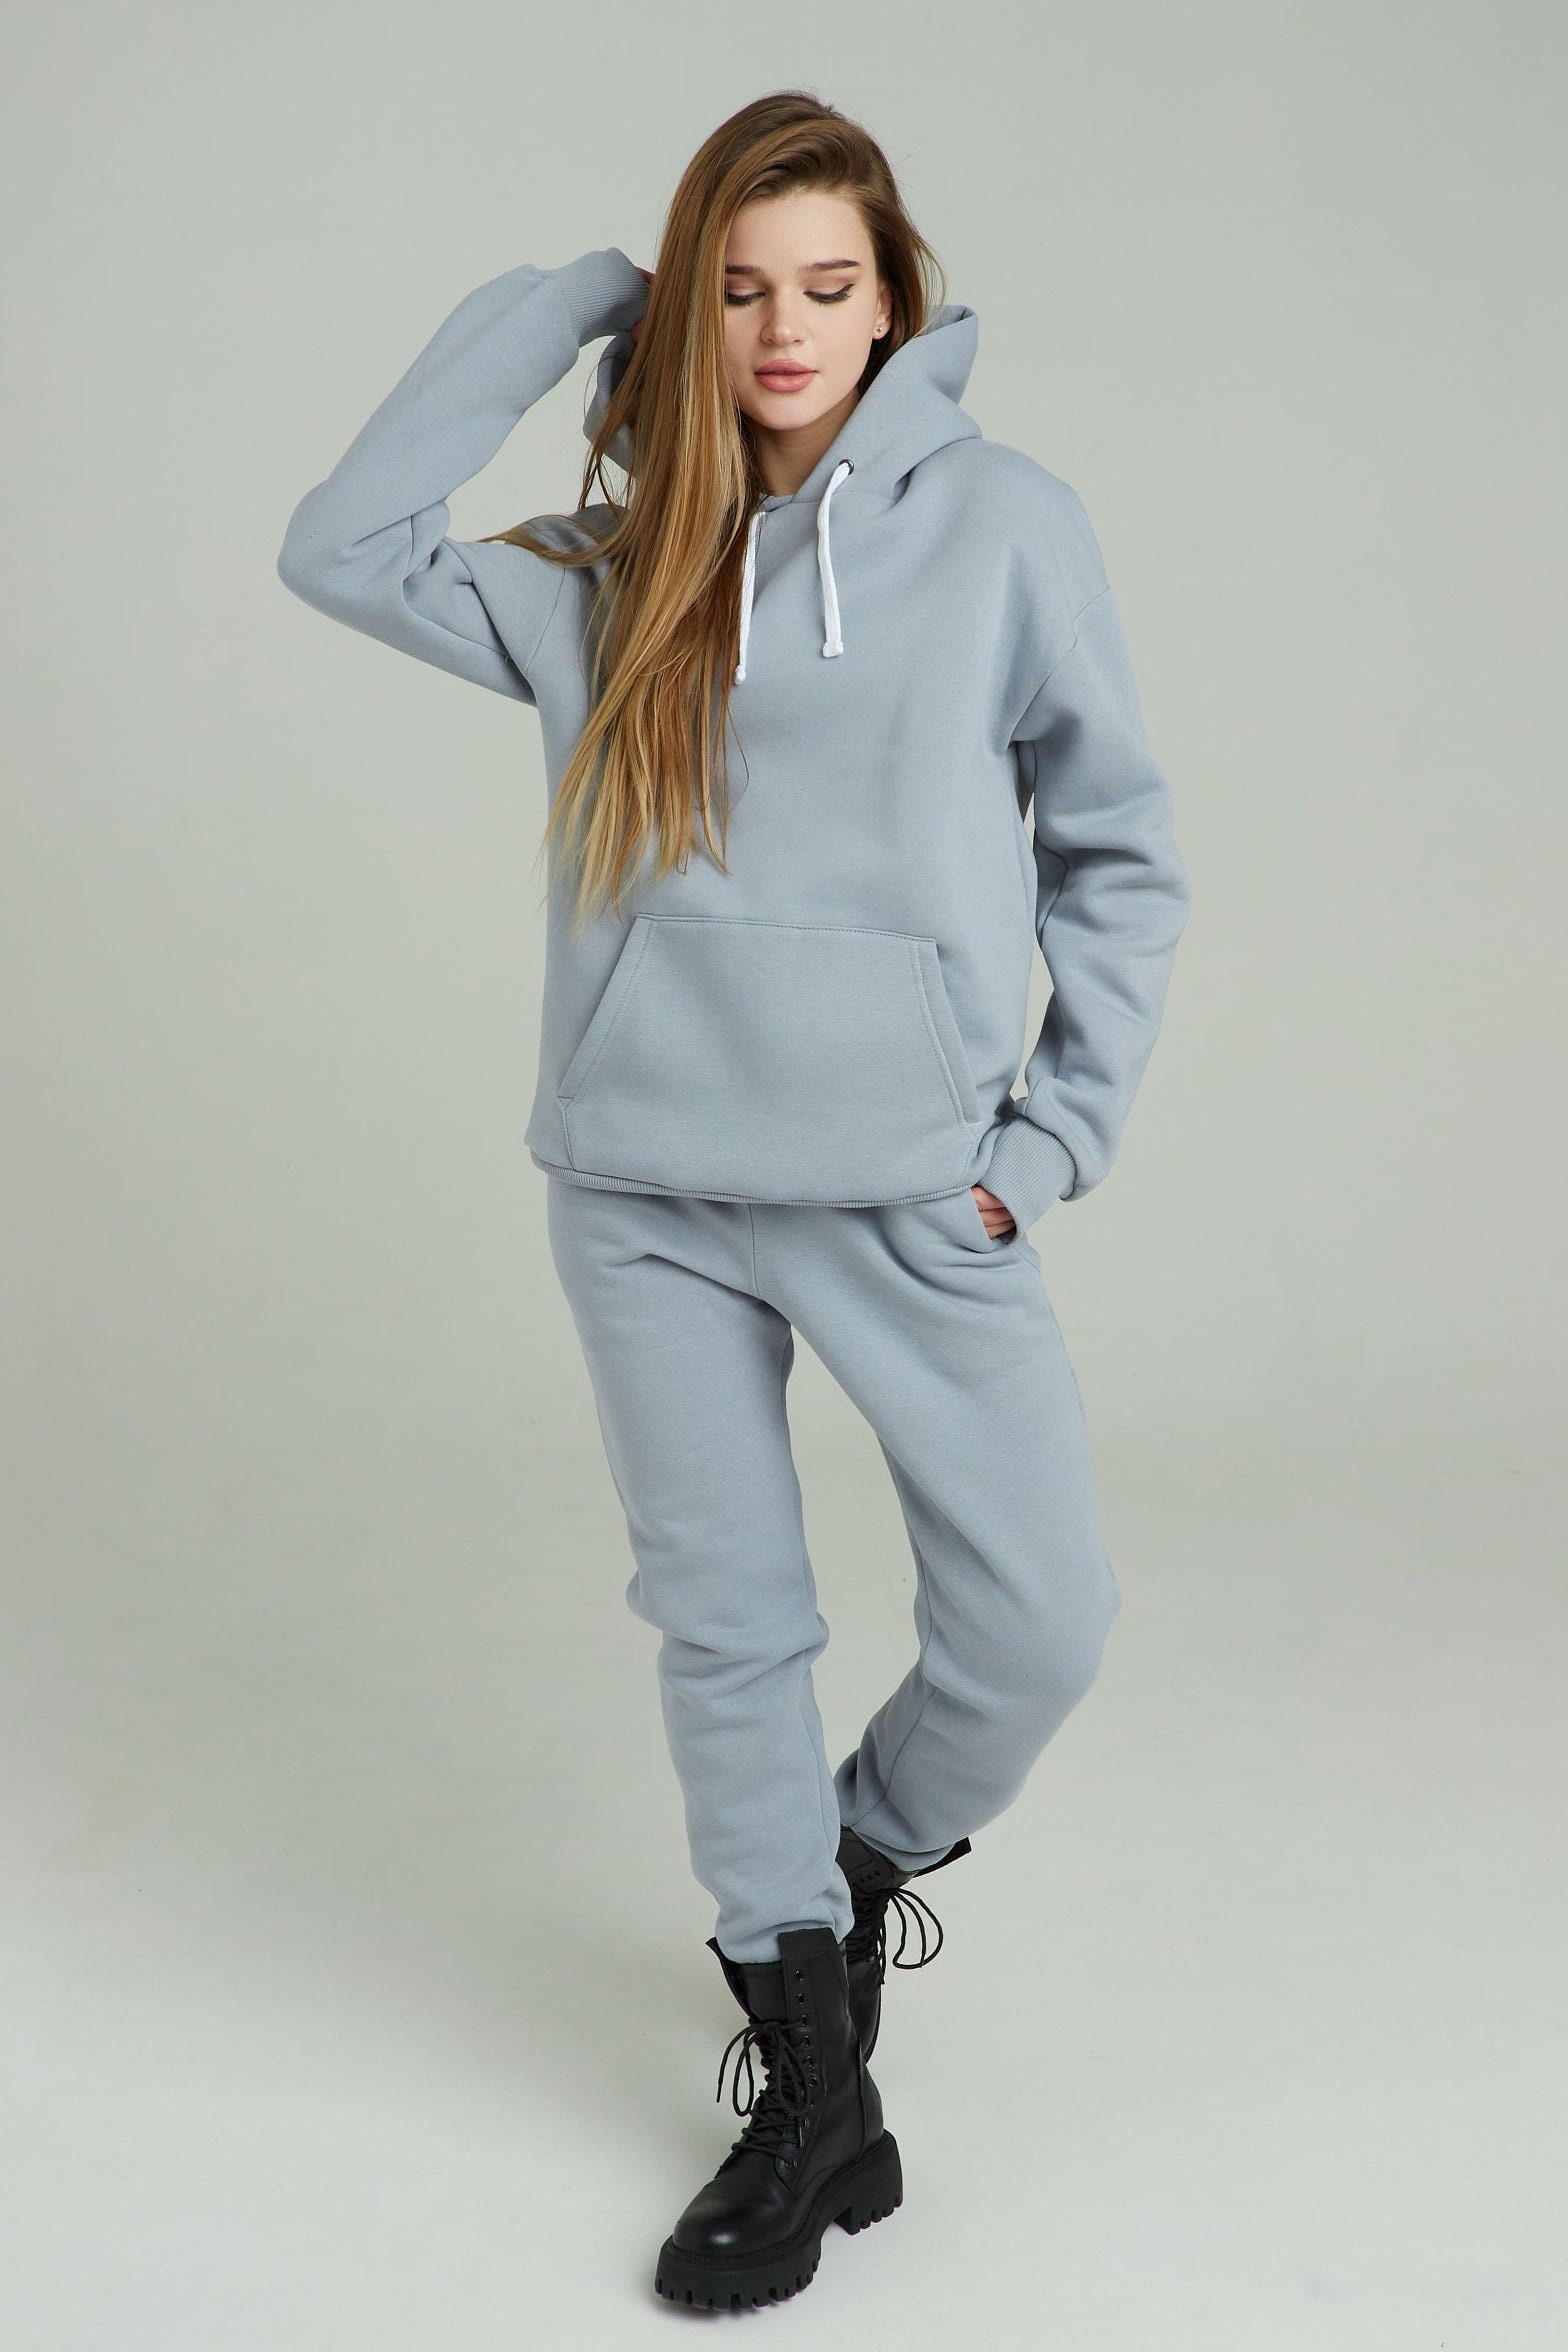 Women's 3 Piece Padded Hooded Sweatshirt Sports Casual Outfit Tracksuit Set